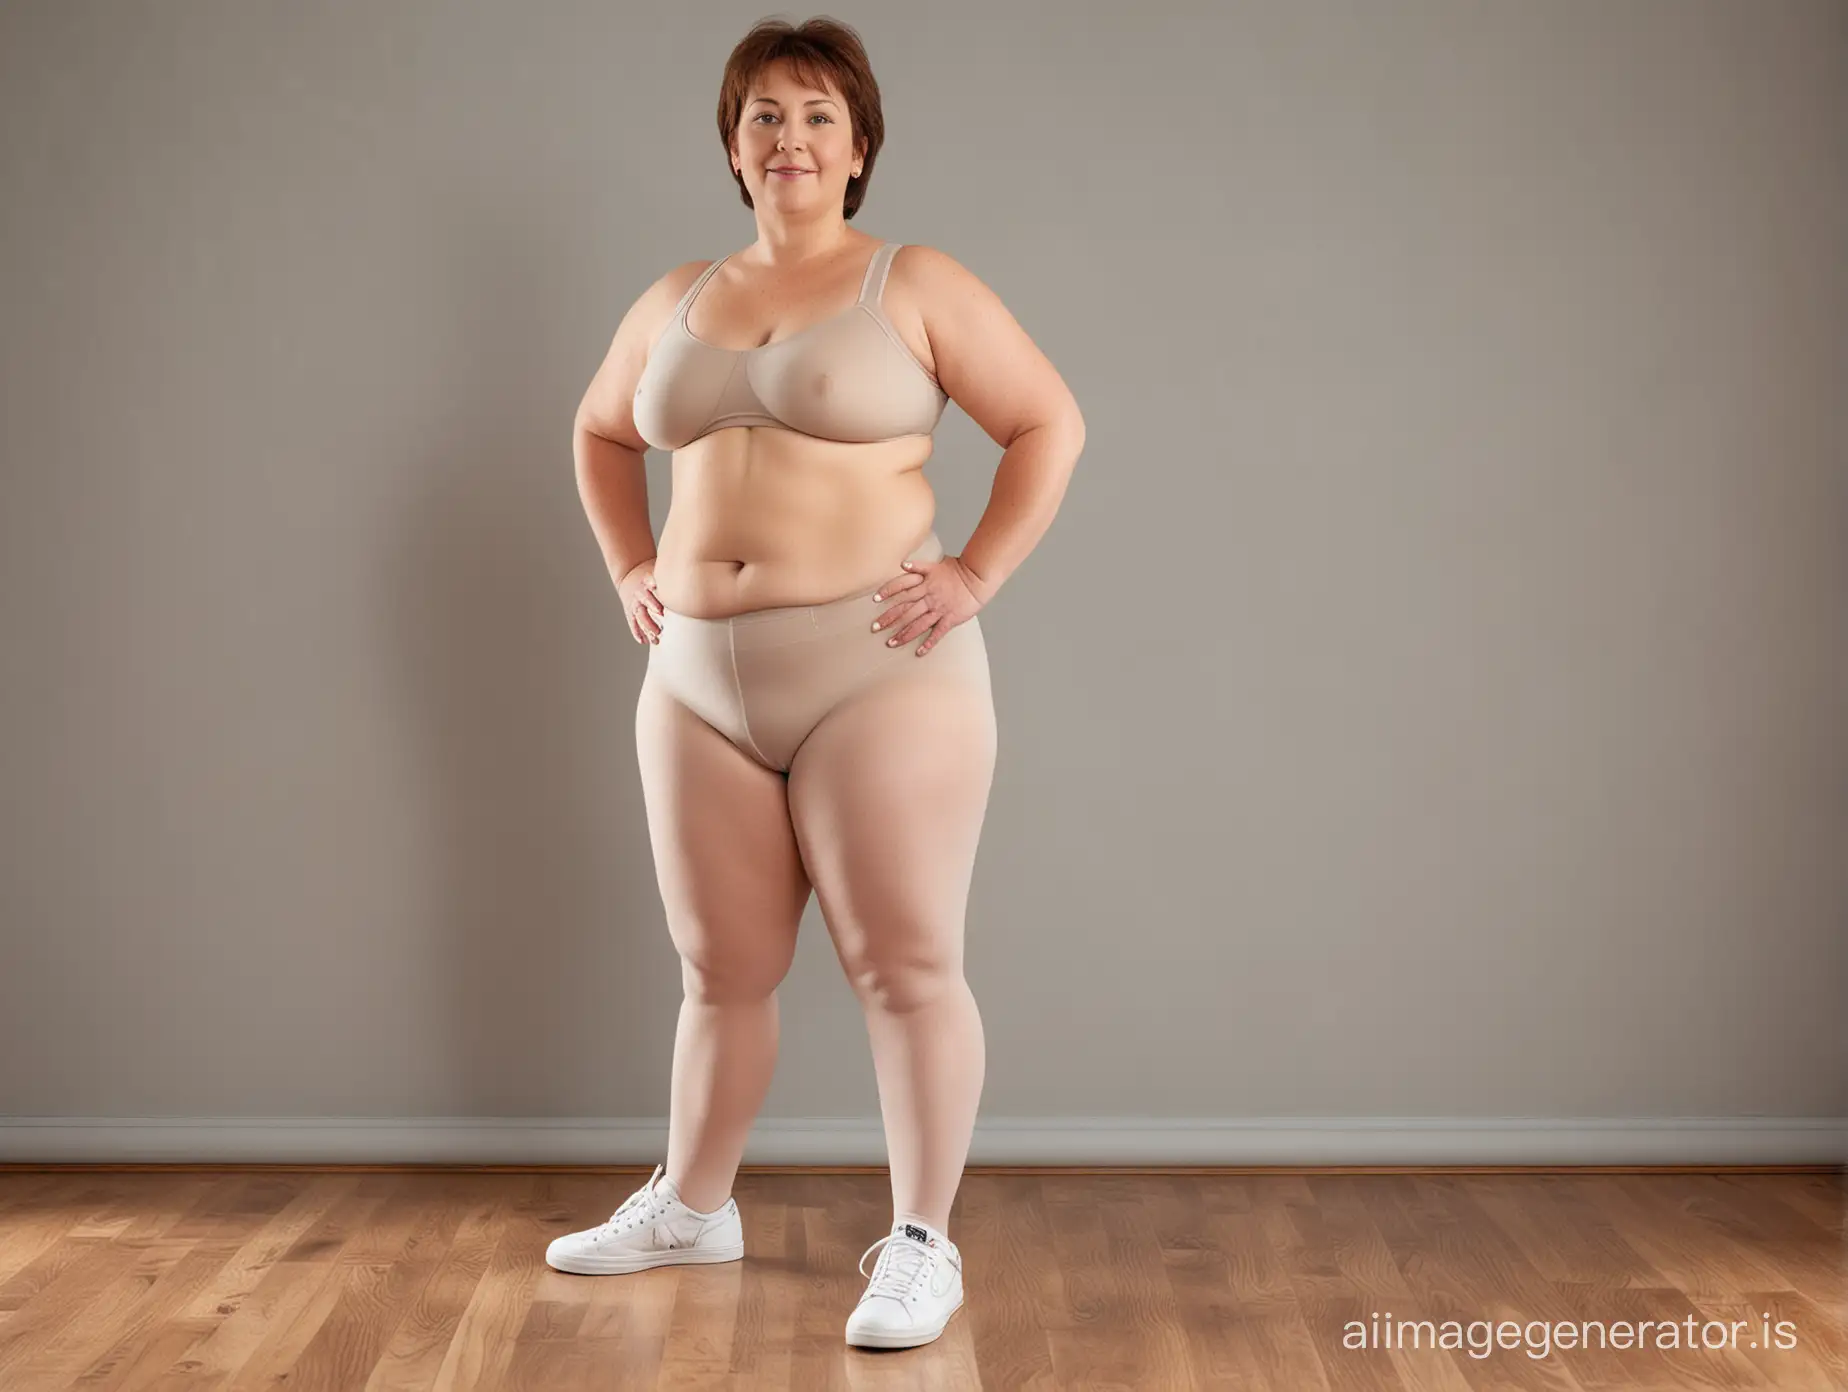 Chubby woman, tall, very small breasts, chubby belly, age 50. Chubby legs and tights. Standing with a white sneakers, tall neck, short brown hairs, Fat wrists